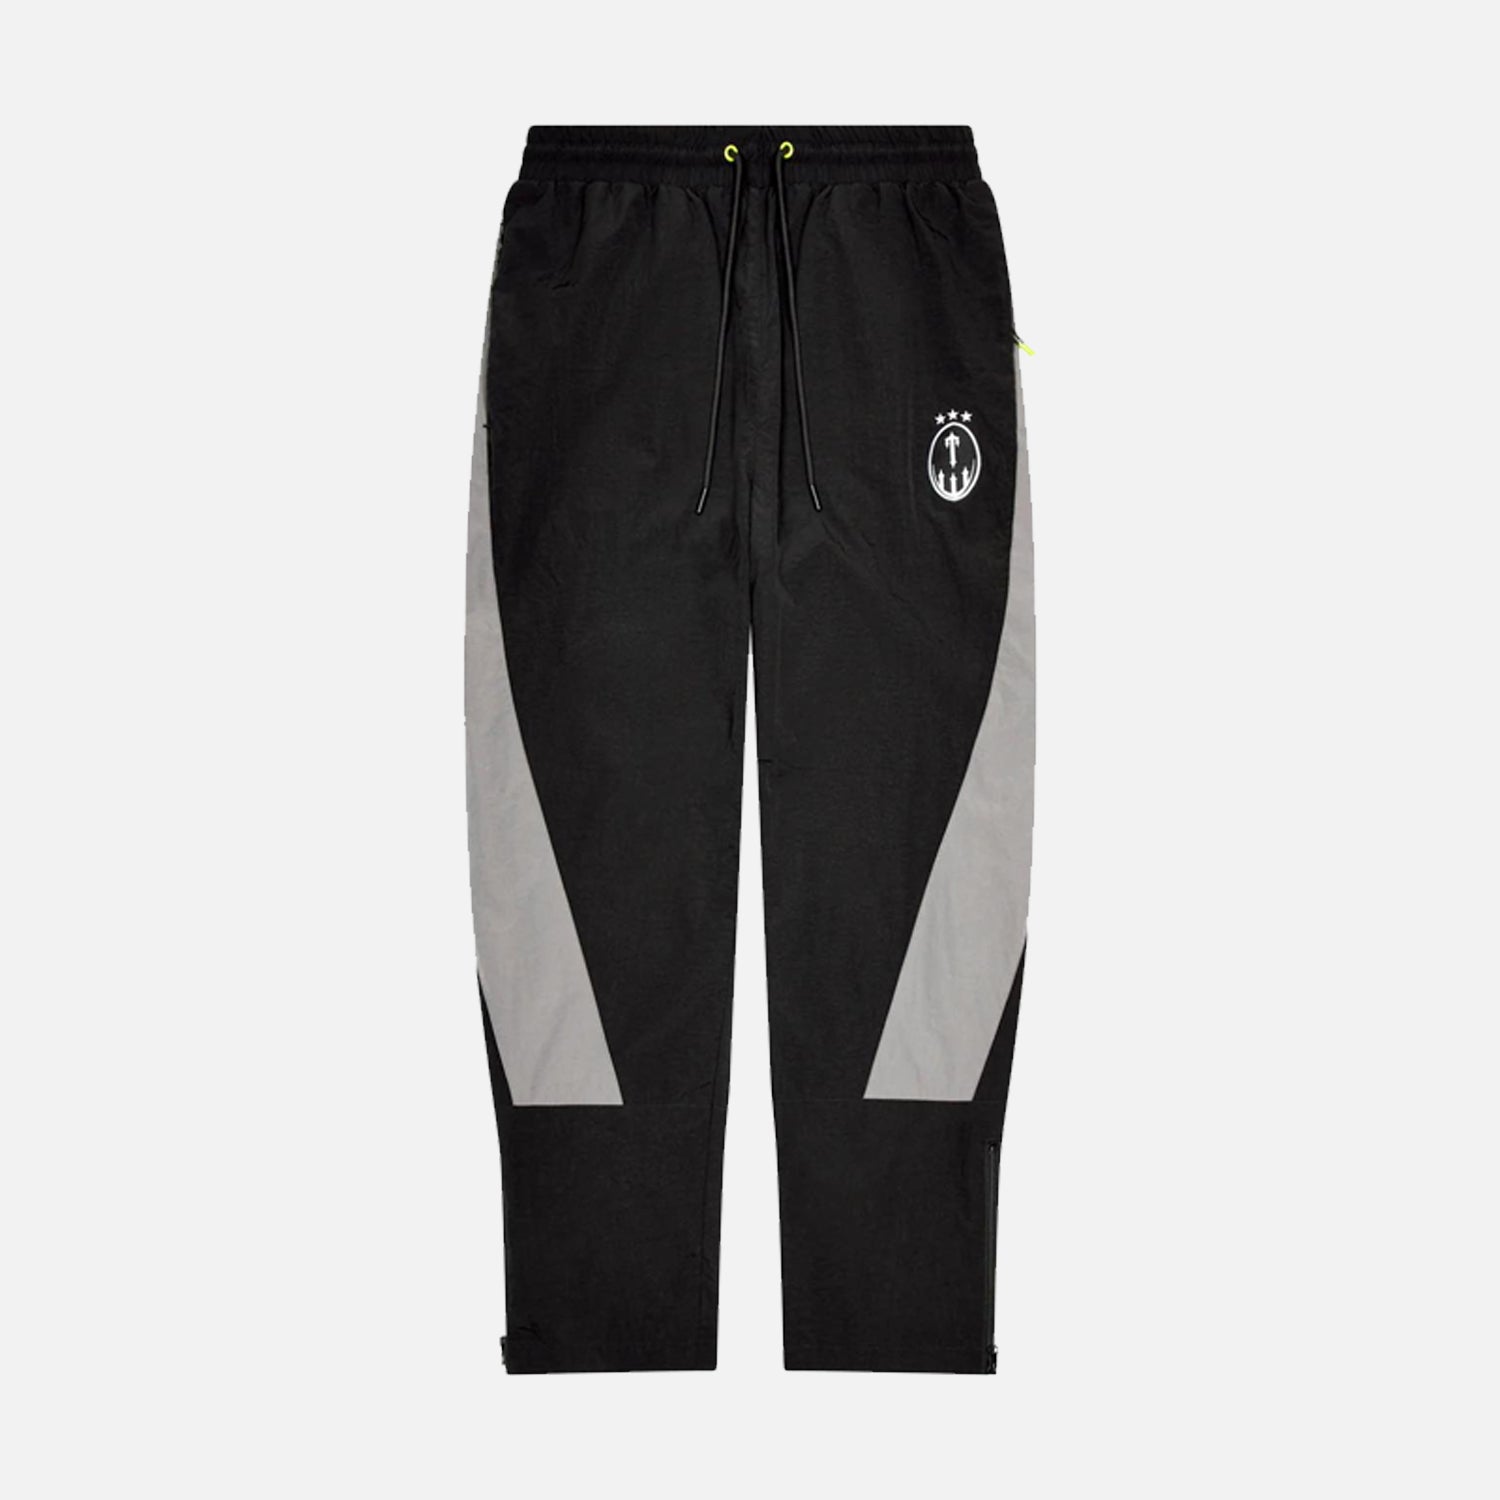 Trapstar Irongate T Crest Hooded Tracksuit - Black / Grey